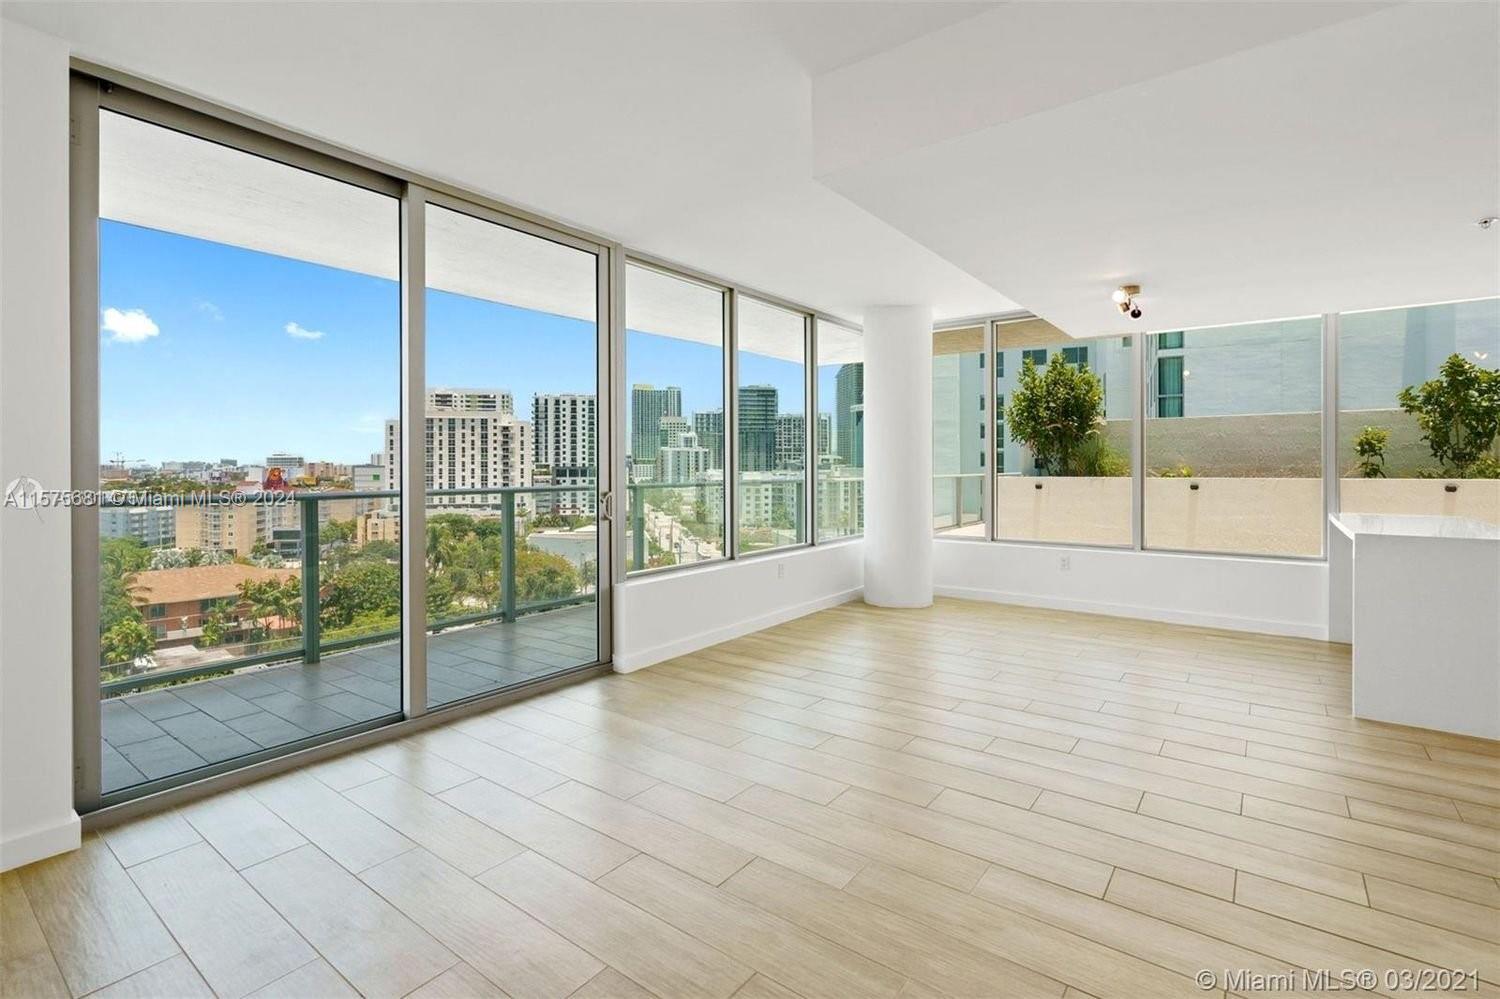 Experience luxury living in this chic west-facing corner unit at LeParc at Brickell. With a massive 